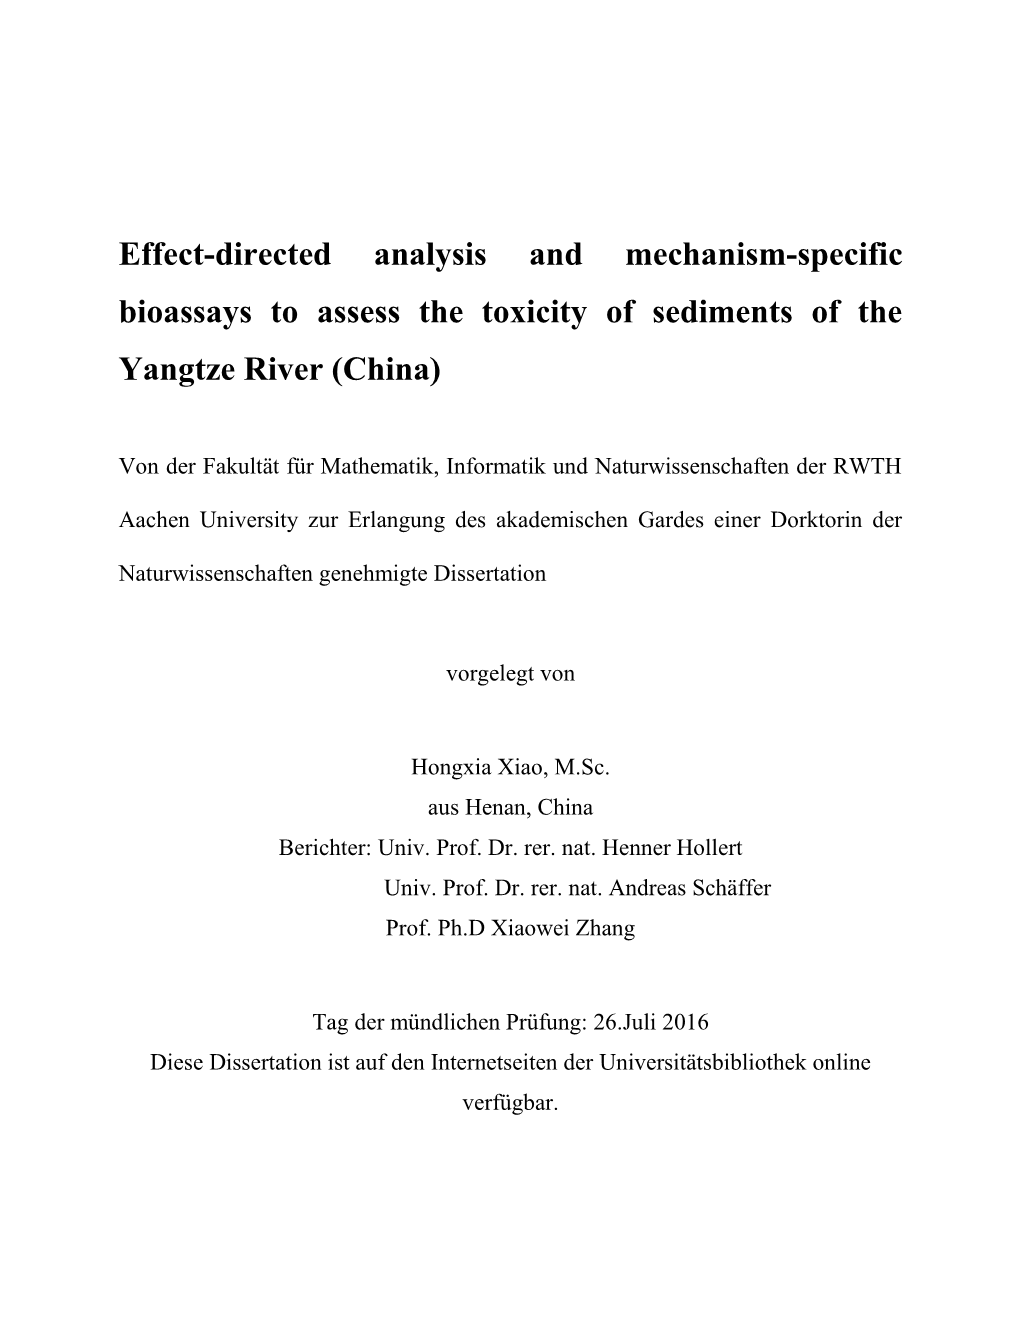 Effect-Directed Analysis and Mechanism-Specific Bioassays to Assess the Toxicity of Sediments of the Yangtze River (China)